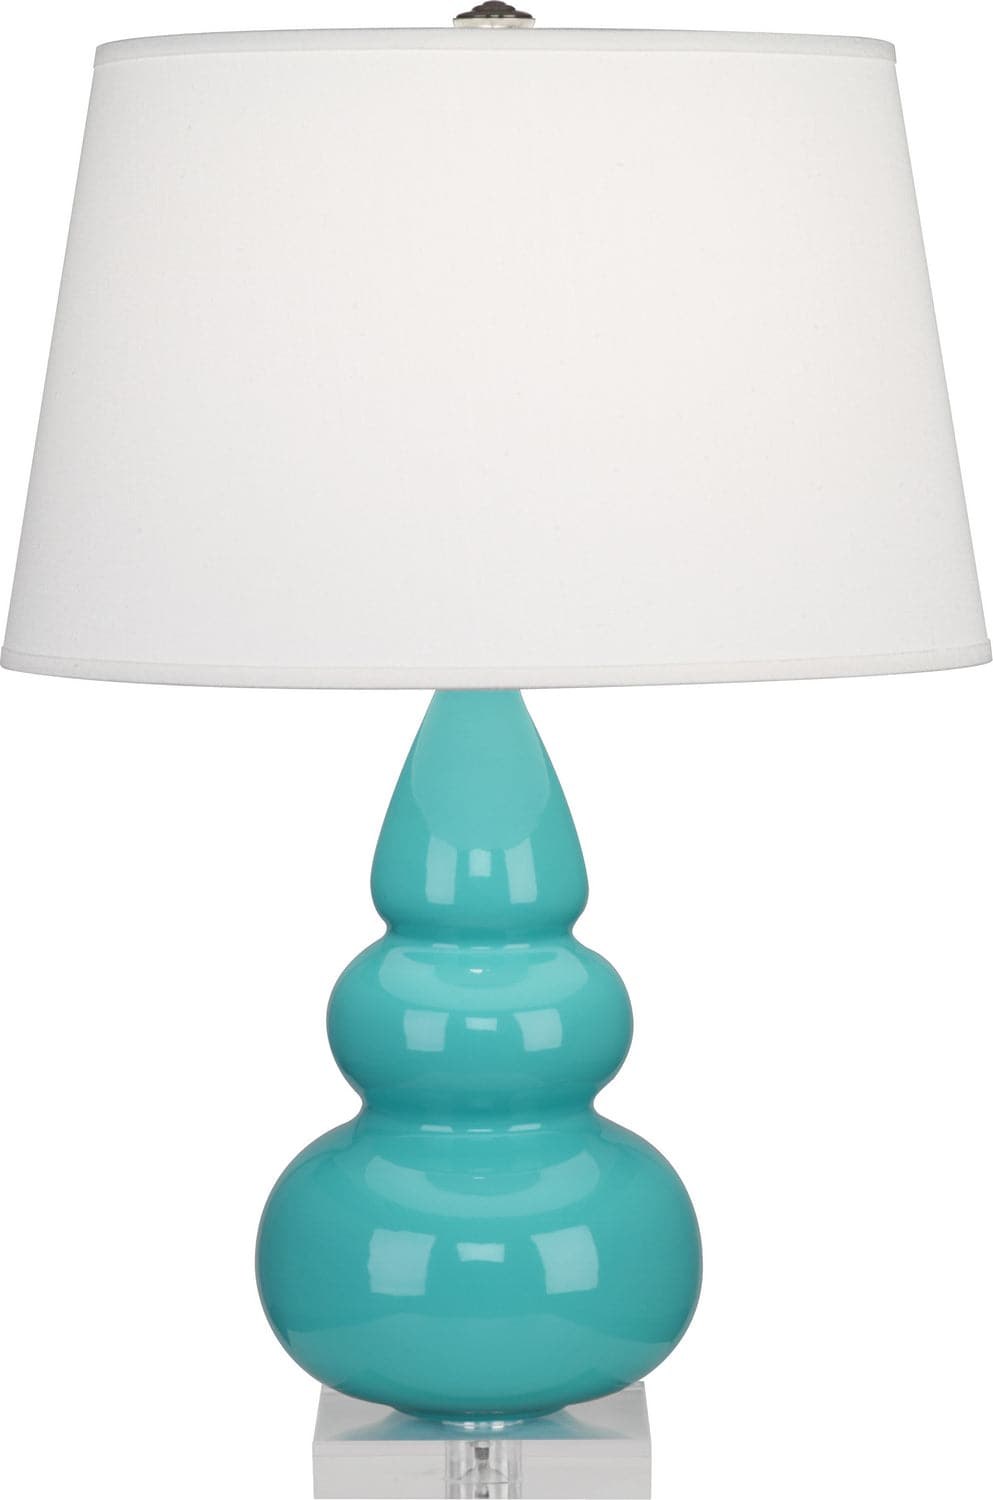 Robert Abbey - A292X - One Light Accent Lamp - Small Triple Gourd - Egg Blue Glazed w/Lucite Base